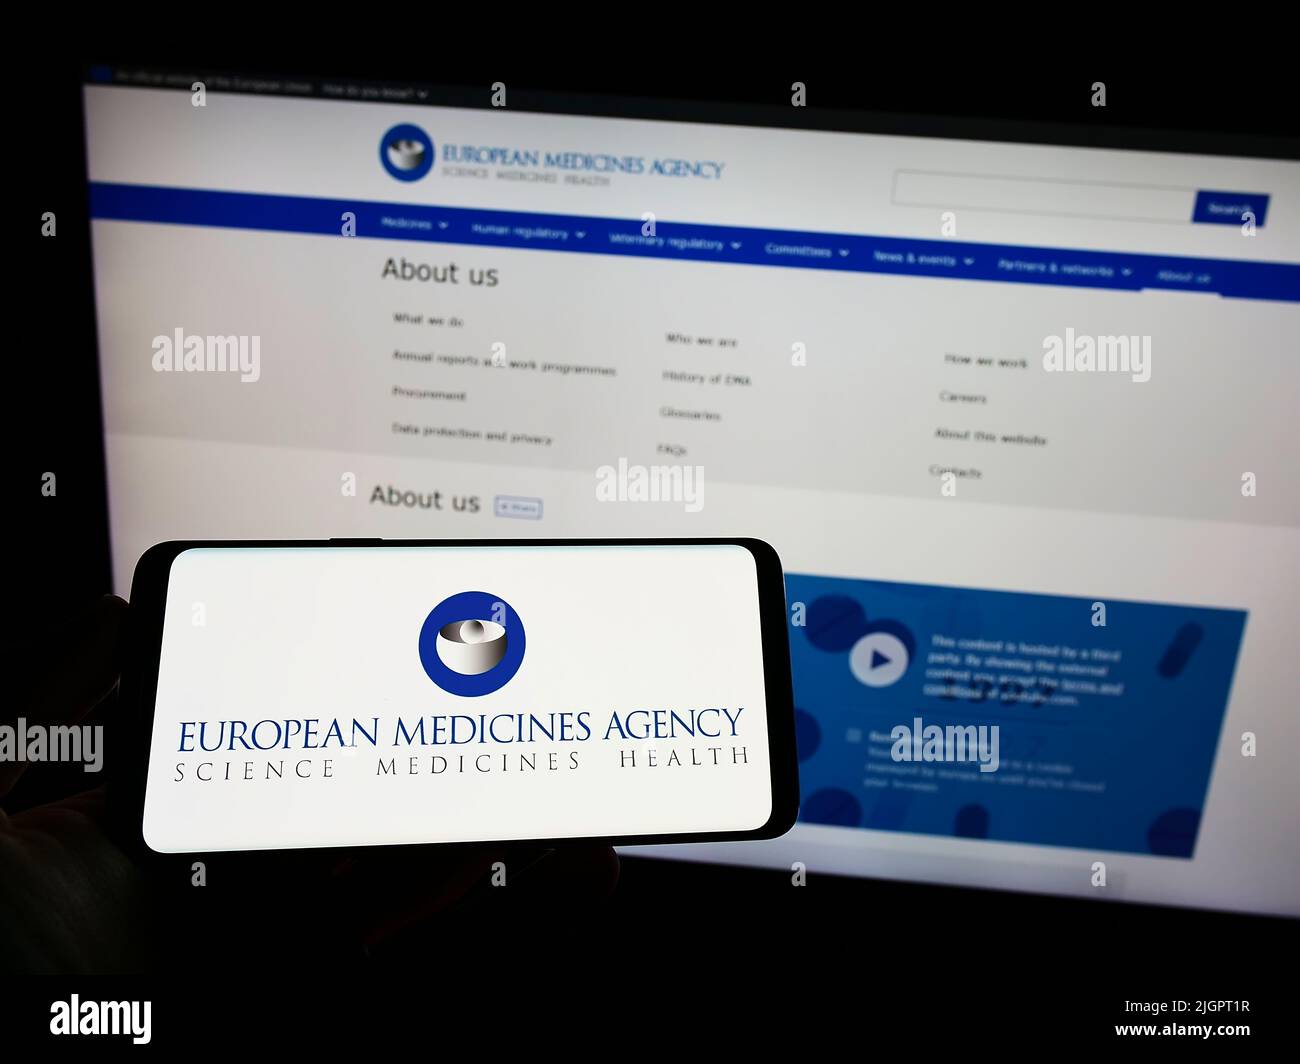 Person holding smartphone with logo of EU agency European Medicines Agency (EMA) on screen in front of website. Focus on phone display. Stock Photo